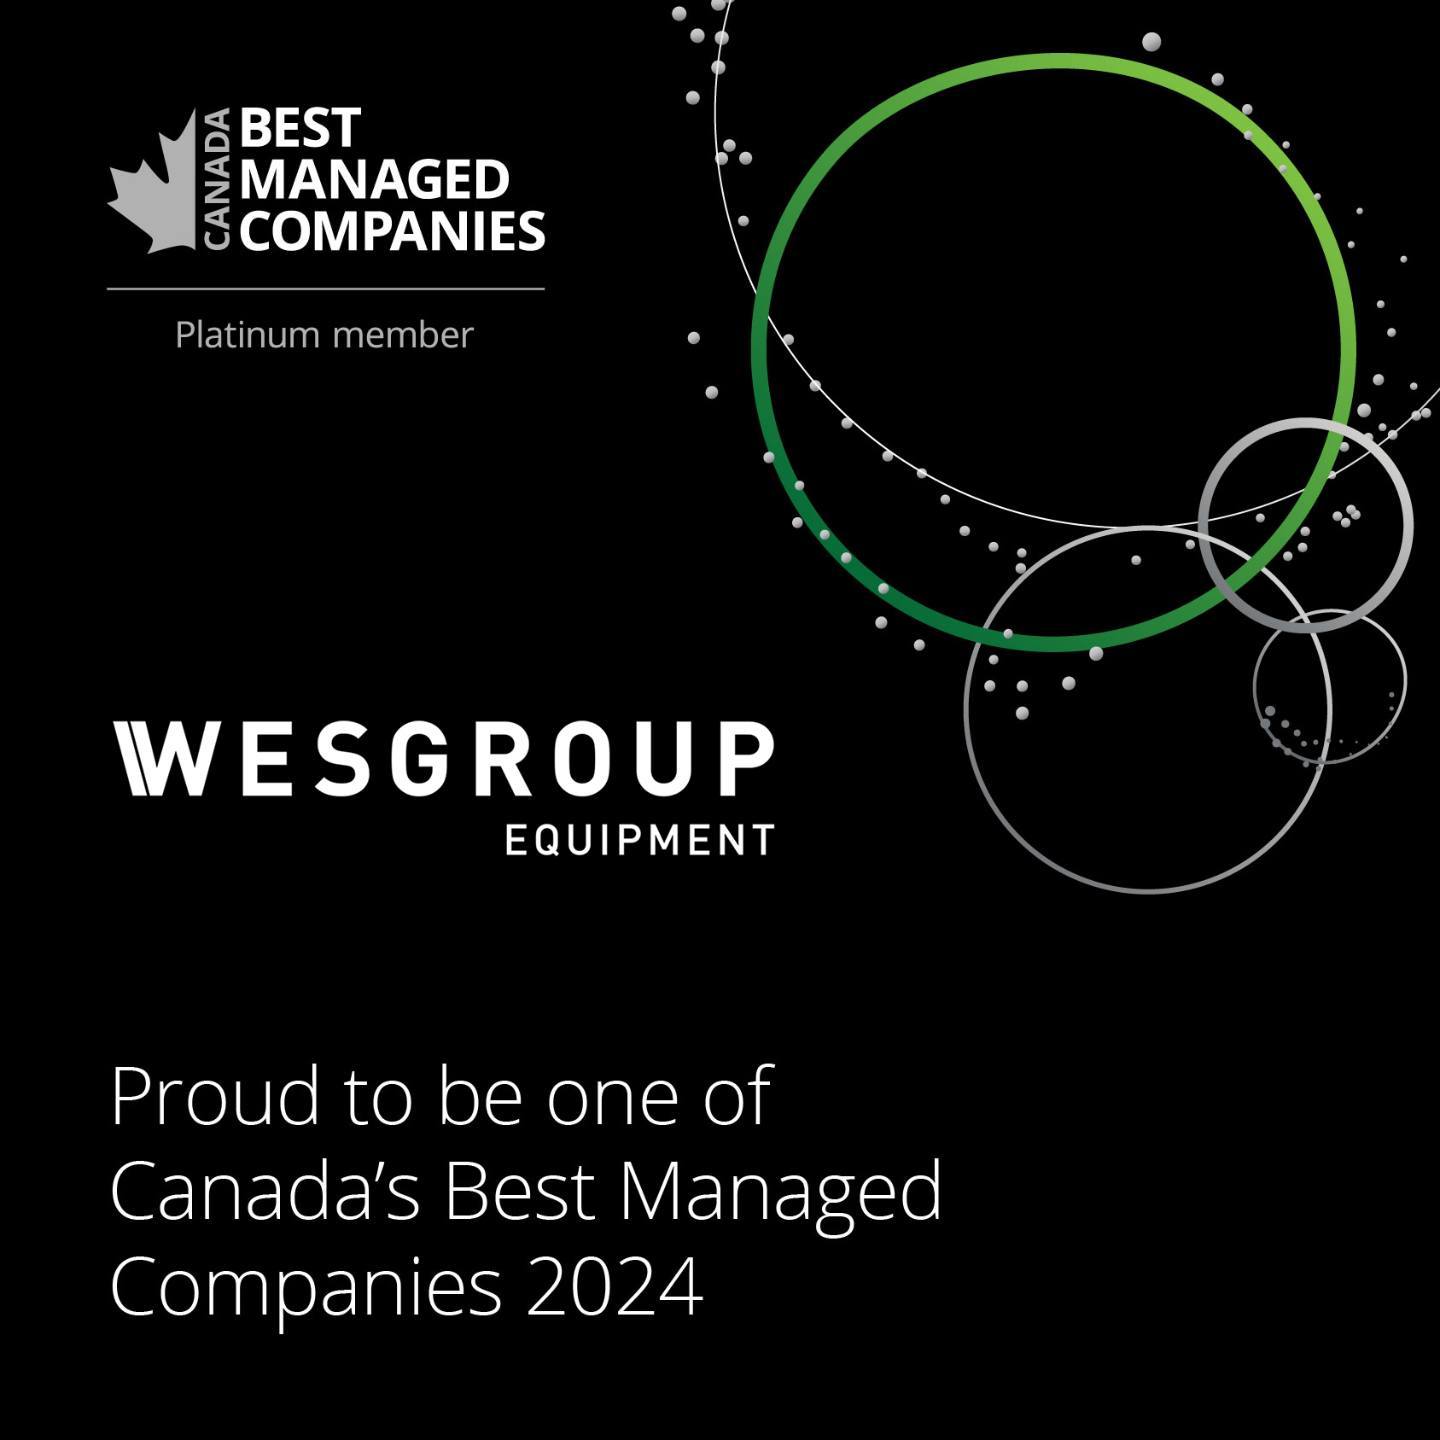 🌟𝗩𝗲𝗿𝗺𝗲𝗲𝗿 𝗕𝗖: 𝗣𝗮𝗿𝘁 𝗼𝗳 𝘁𝗵𝗲 𝗣𝗹𝗮𝘁𝗶𝗻𝘂𝗺 𝗟𝗲𝗴𝗮𝗰𝘆!🌟 Wesgroup Equipment is celebrating 7 years as one of Canada's Best Managed Companies, and our first year as a Platinum winner! As a member of the Wesgroup Equipment family of brands, Vermeer BC is dedicated to upholding the high standards that have earned our family this prestigious recognition. Here’s to many more successes! 

Read more here:
https://www.wesgroupequipment.com/our-family/news/canadas-best-managed-companies-platinum-winner/

#wesgroupequipmentfamilyofbrands #canadasbestmanagedcompanies